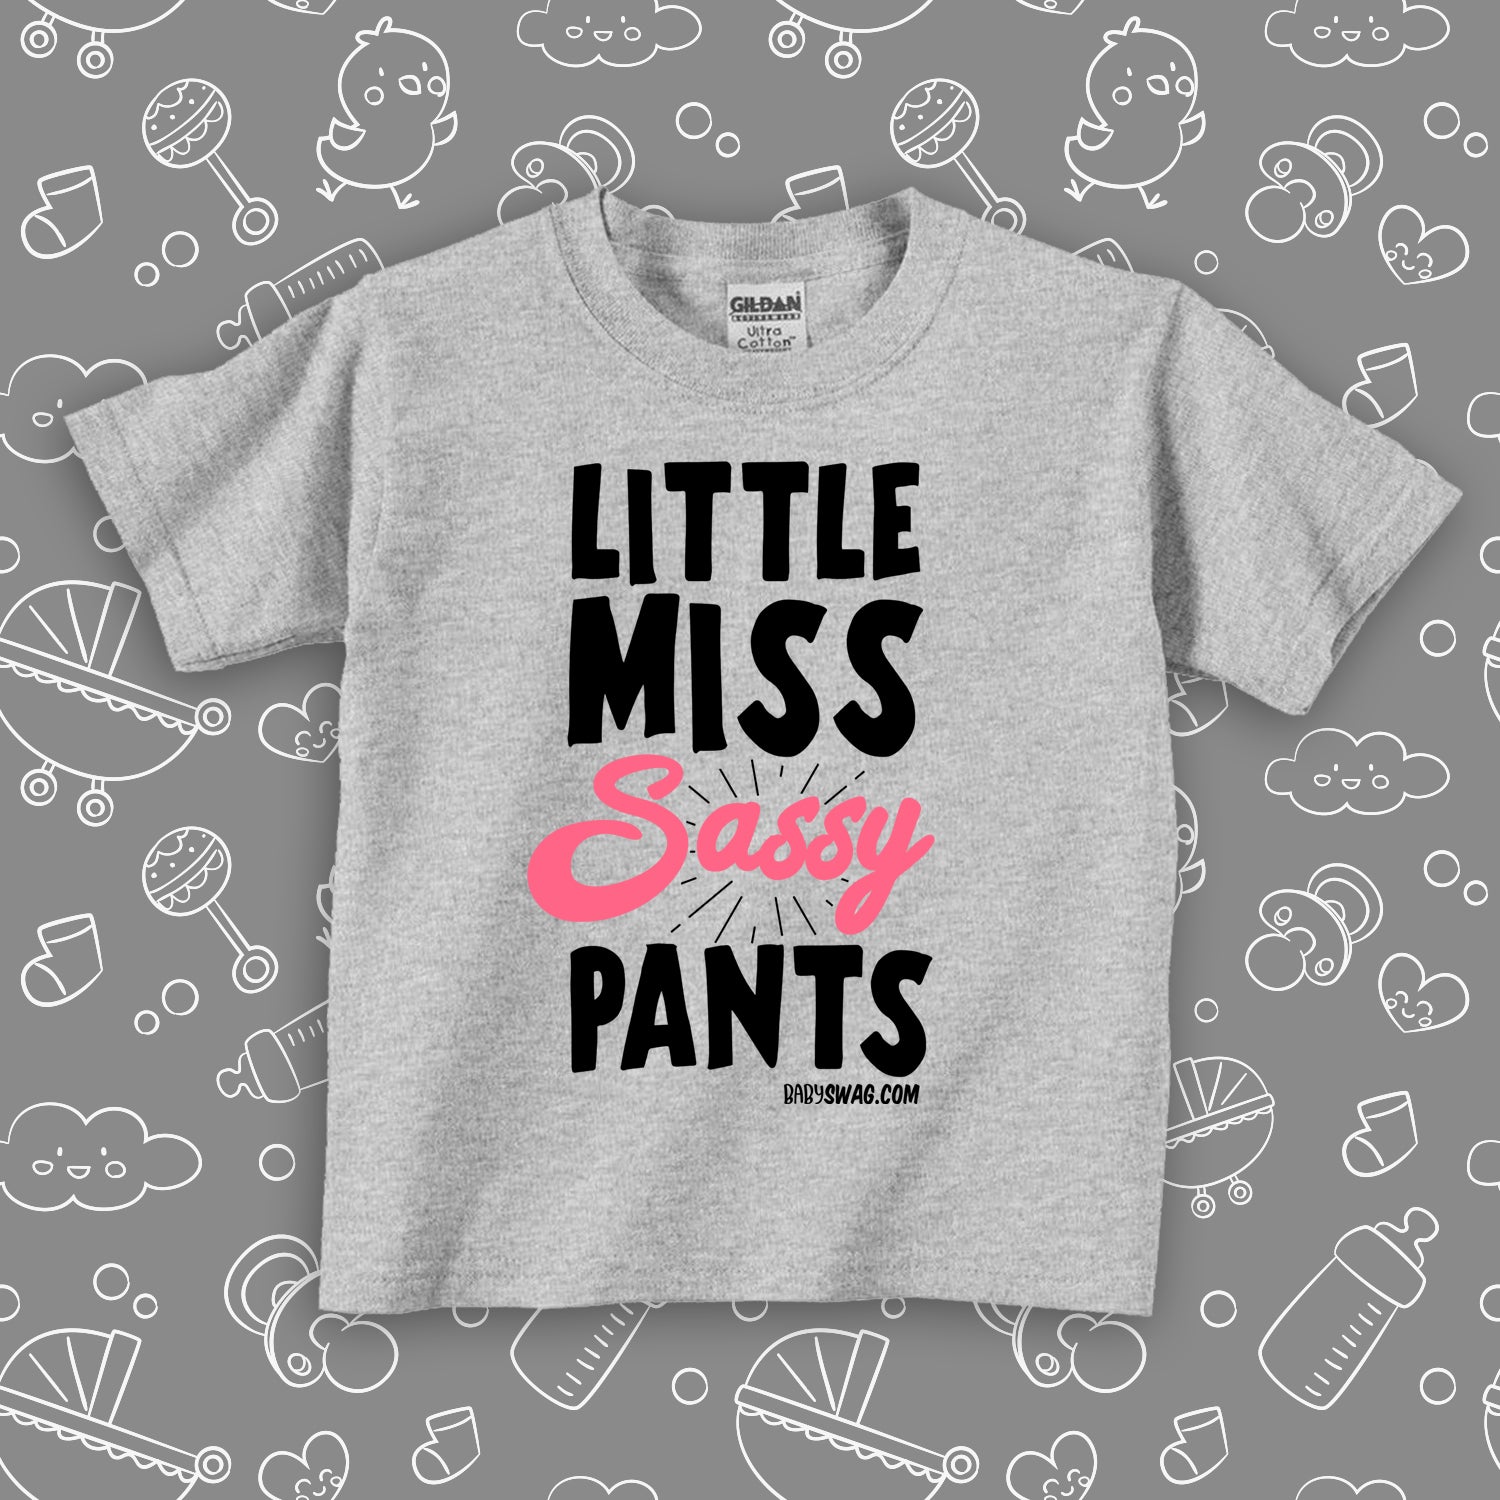 Grey toddler girl shirt with saying "Little Miss Sassy Pants".